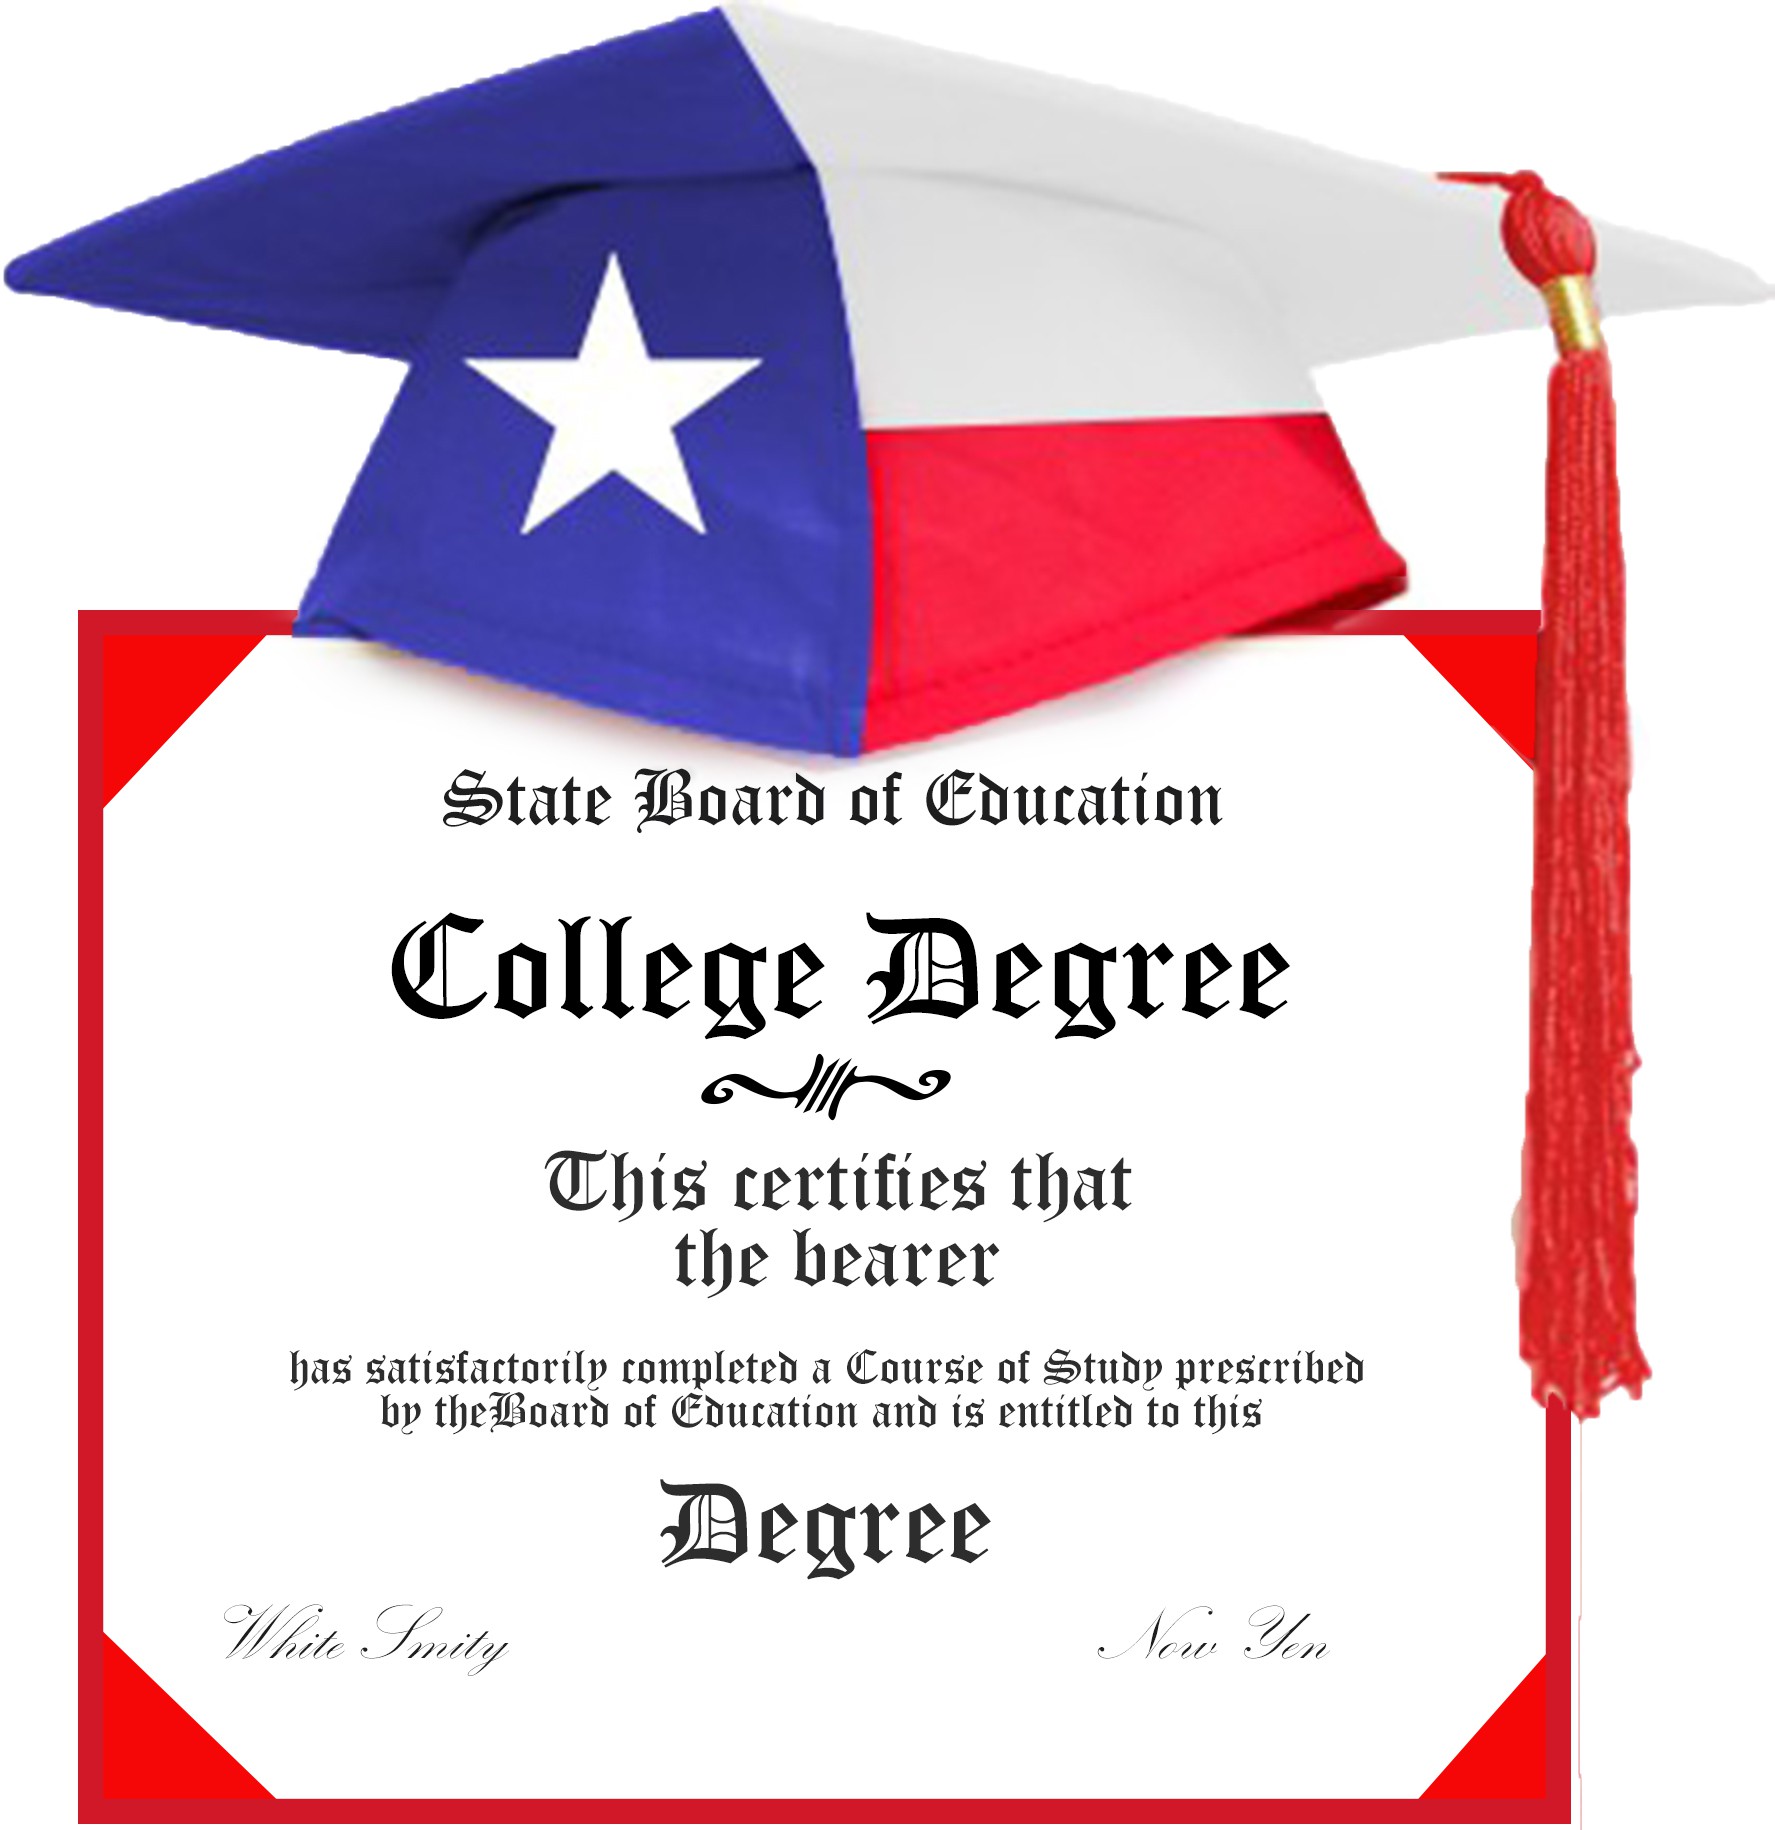 Seminary of the Southwest College Degree